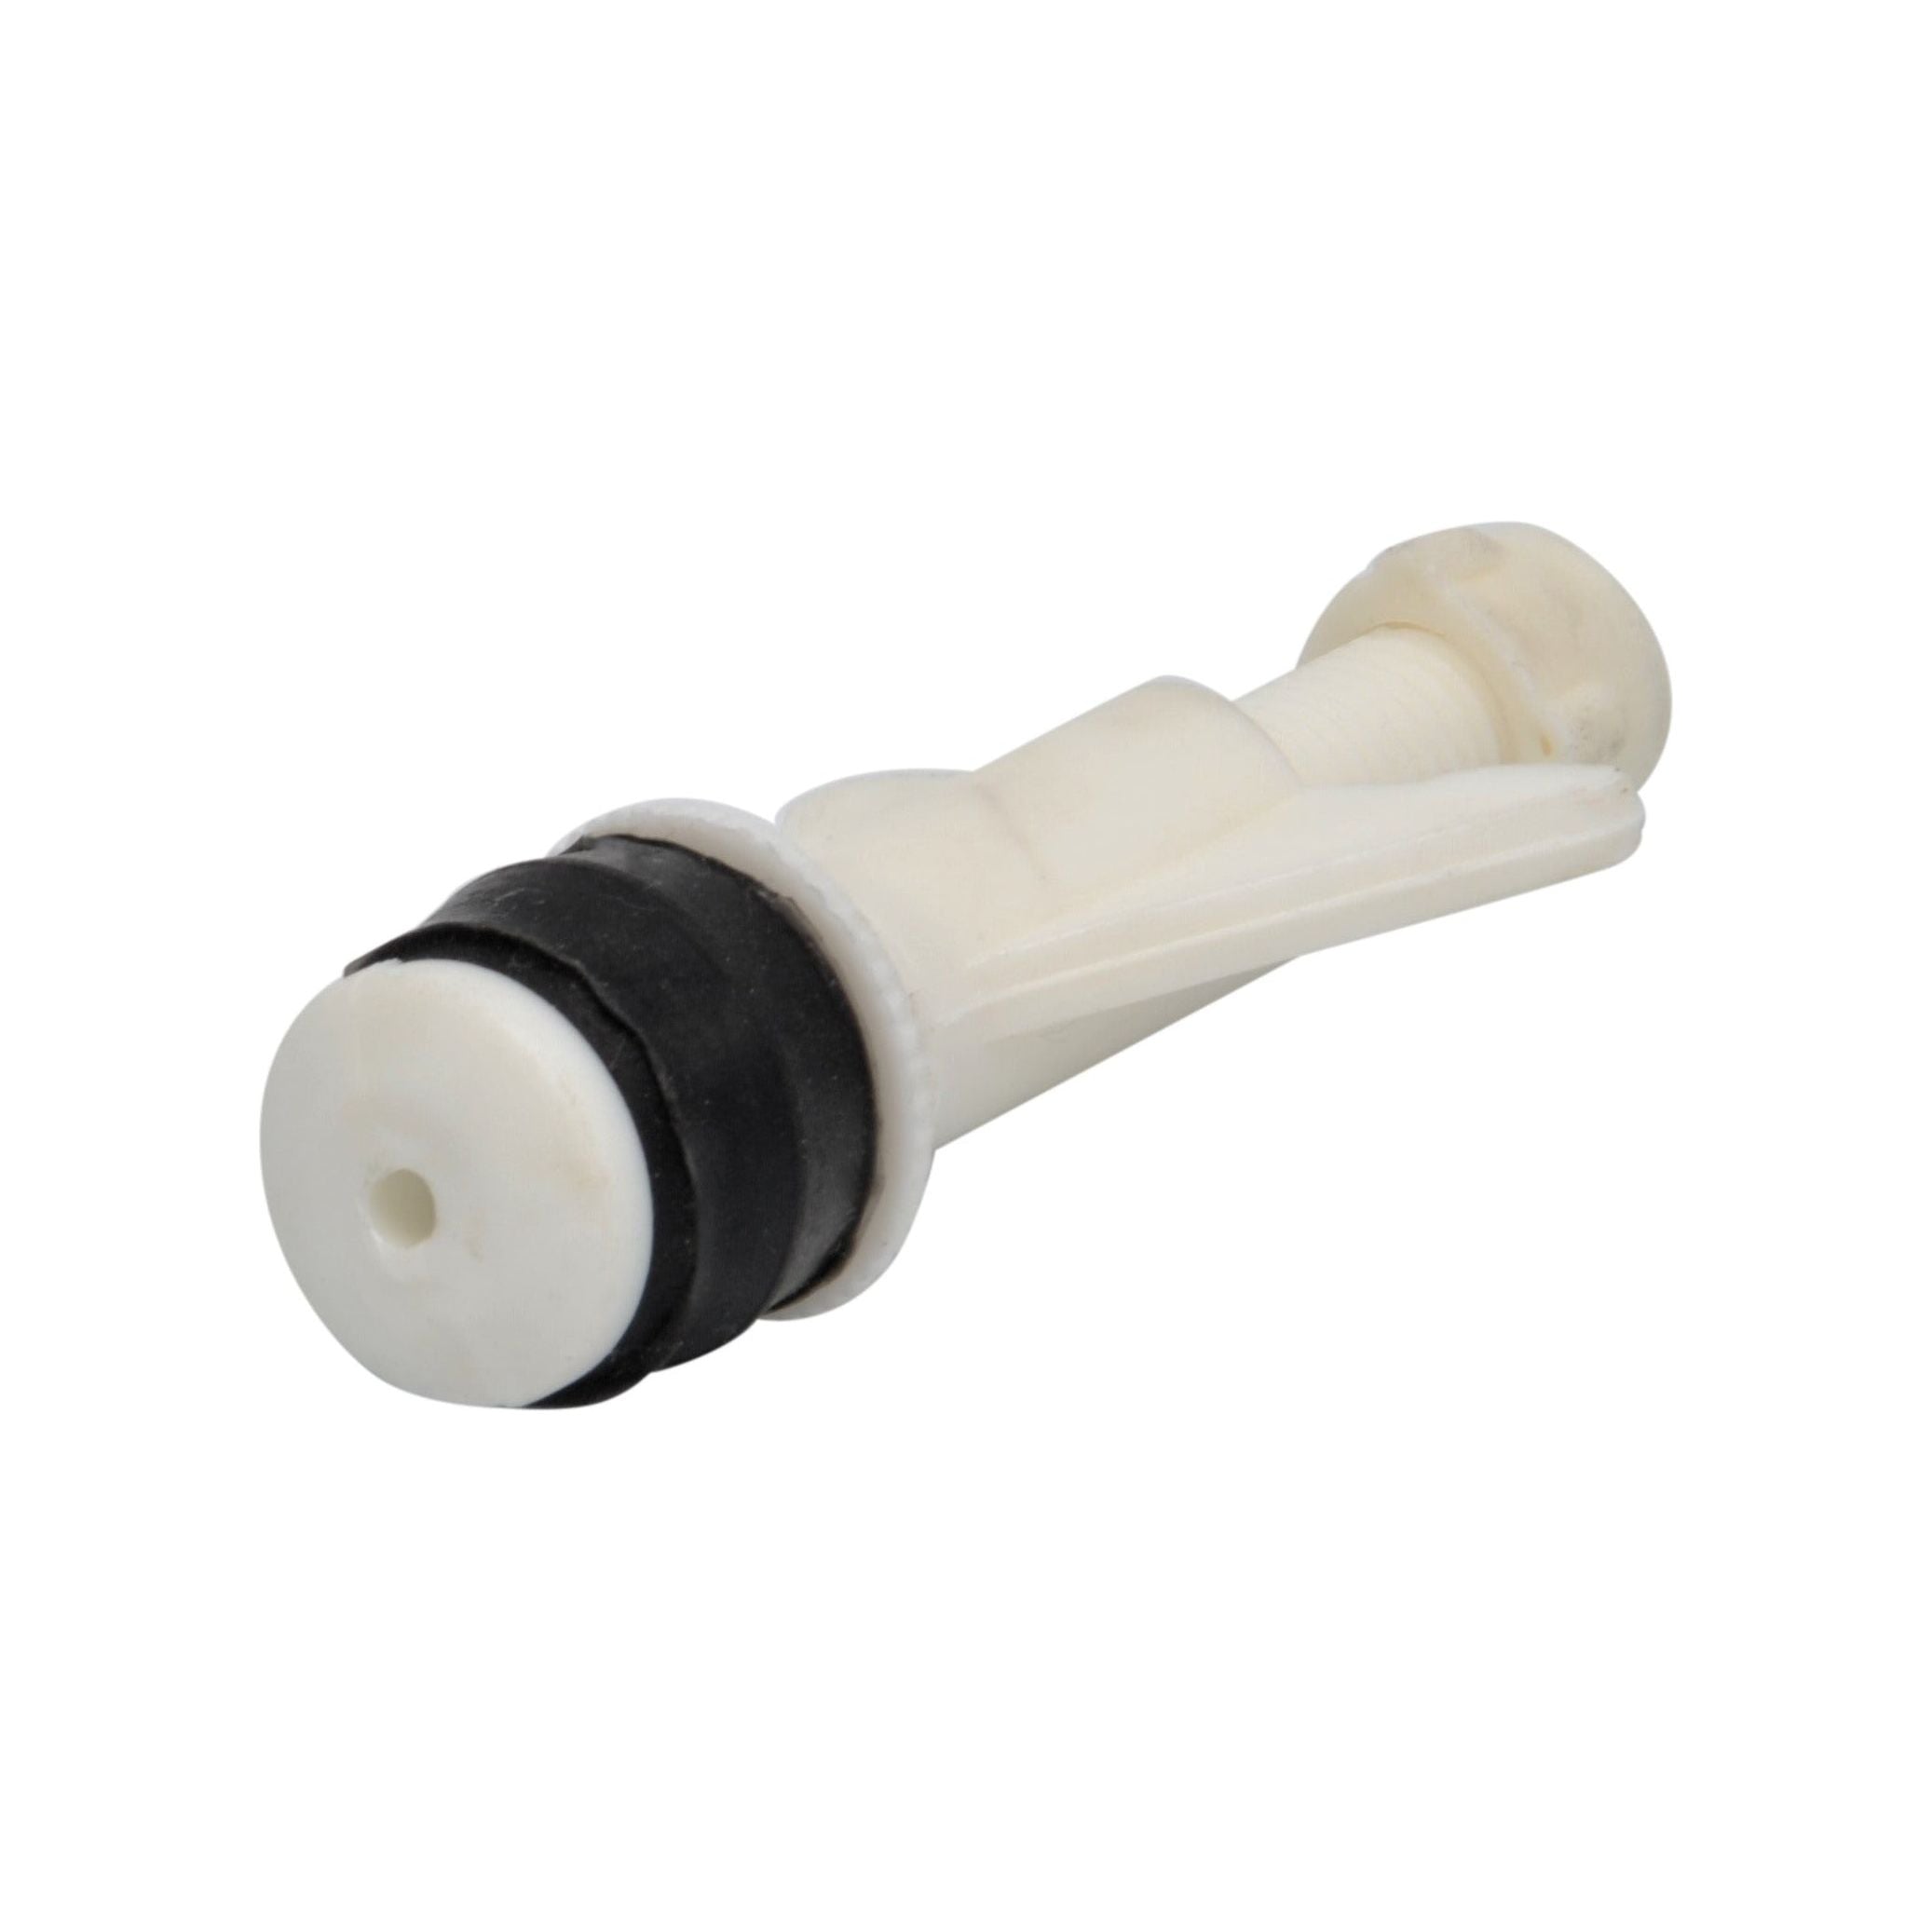 Nylon Mechanical Pipe expanding Test plug bung with 10mm bypass 18mm to 25mm